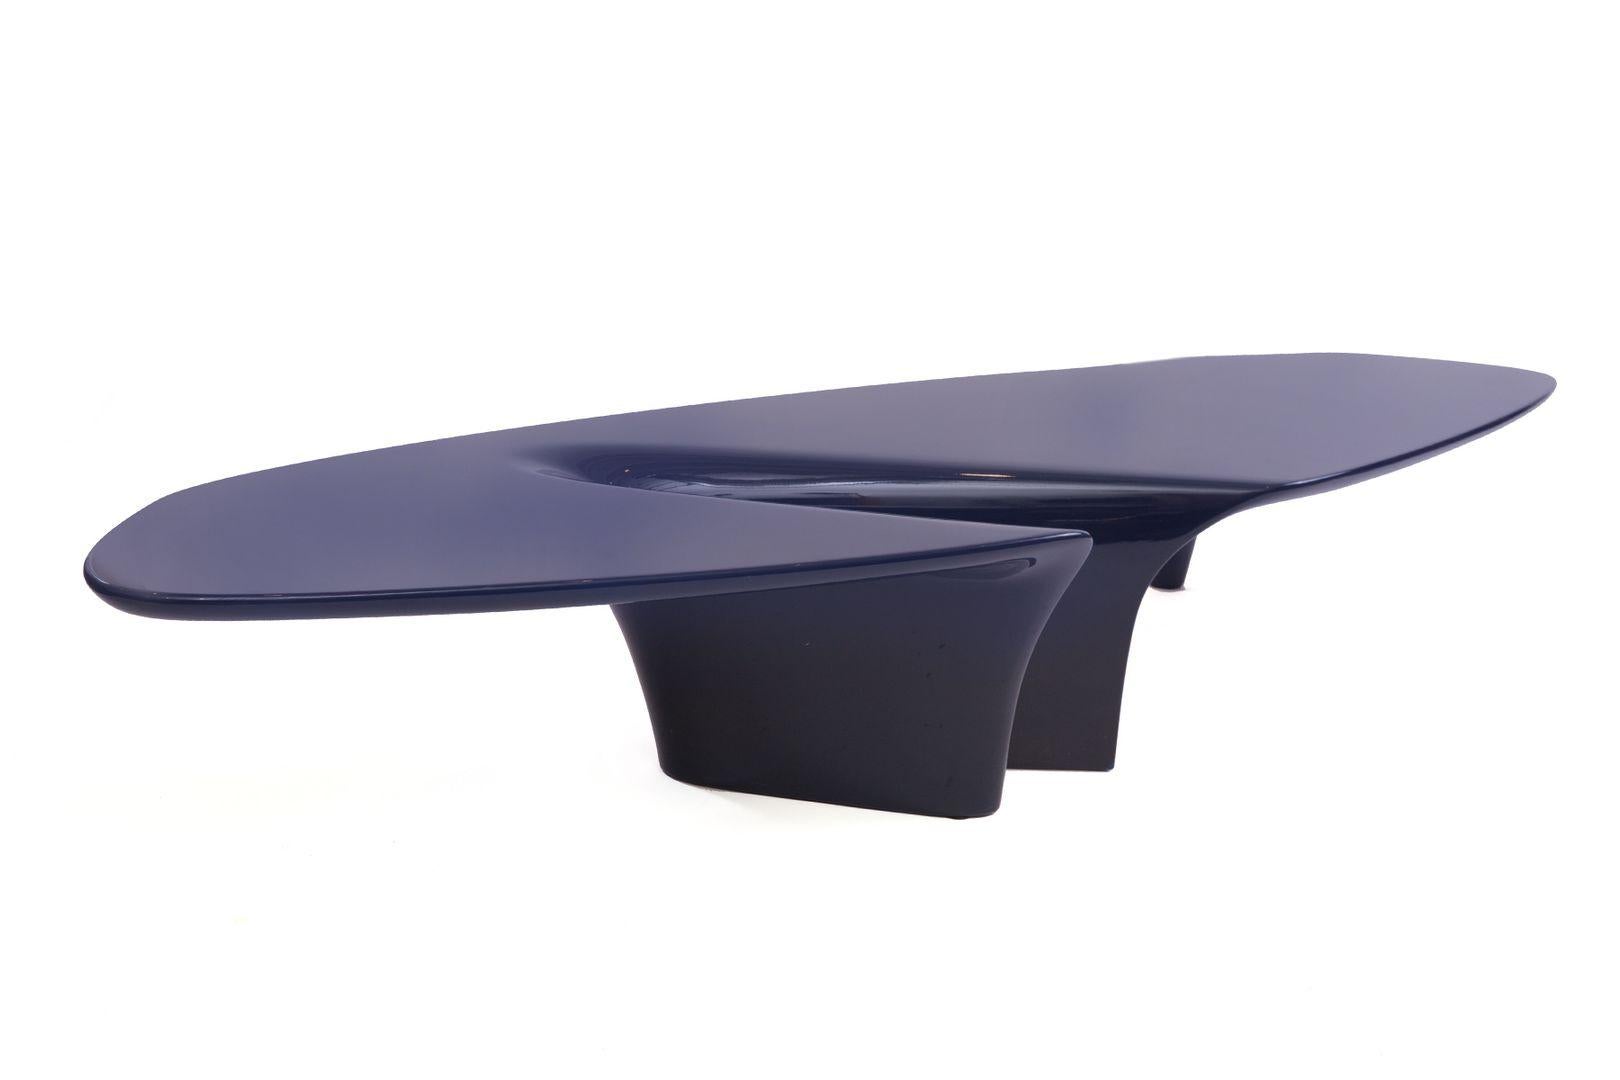 Even a coffee table can become a piece of art if it can stand regardless of the typological limitations. Fredrikson Stallard address the issue with the strength of the material to be bent and shaped. The result is a completely new form, marked by an